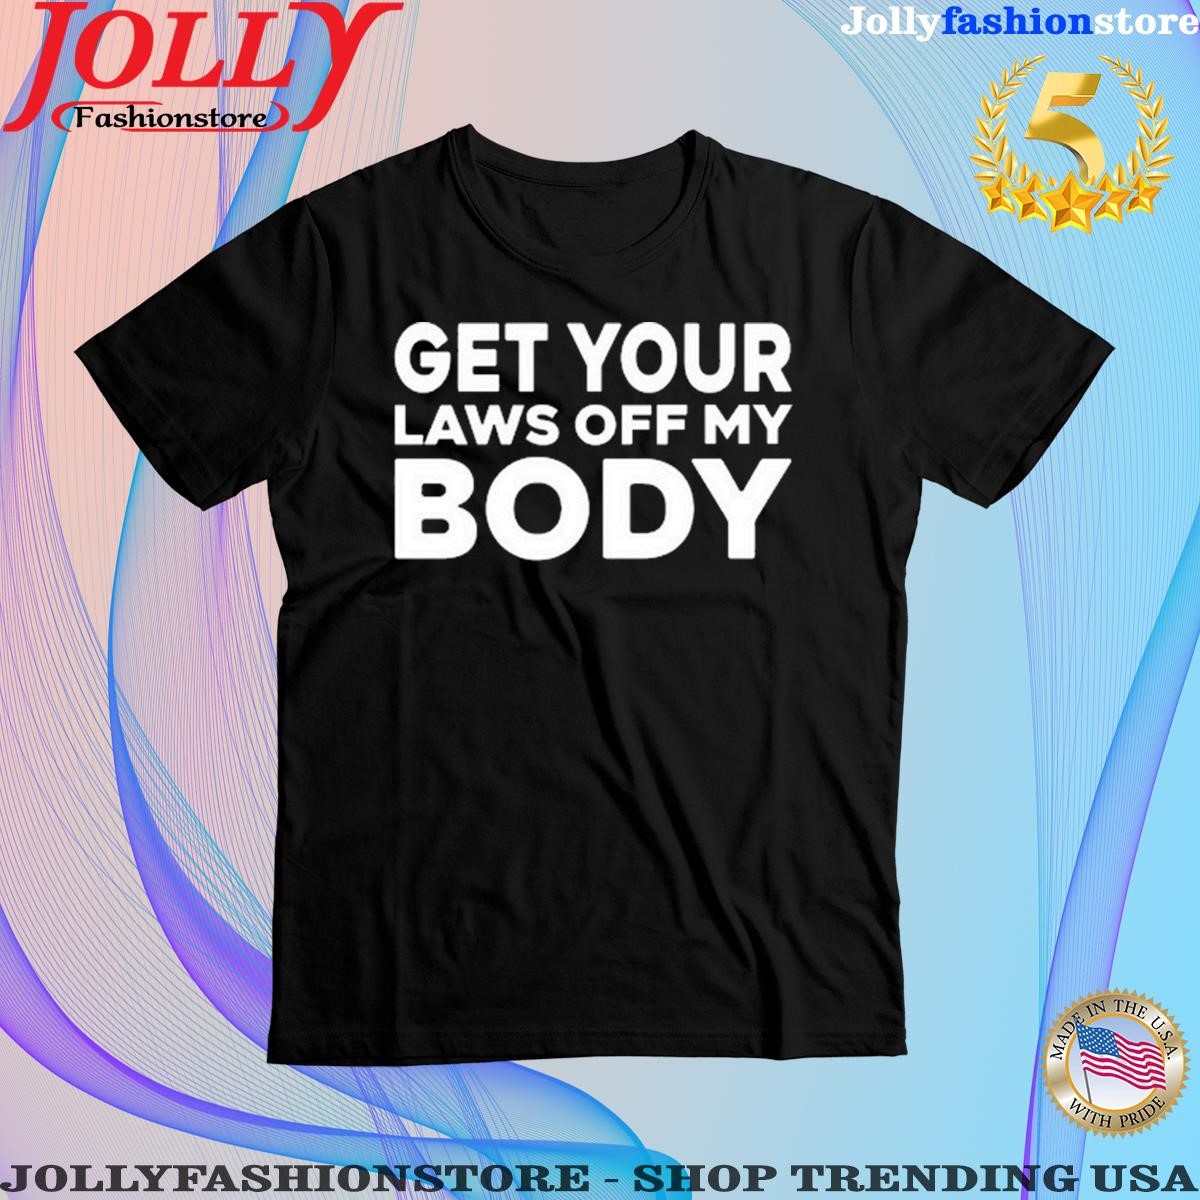 Trending chloebailey get your laws off my body Shirt